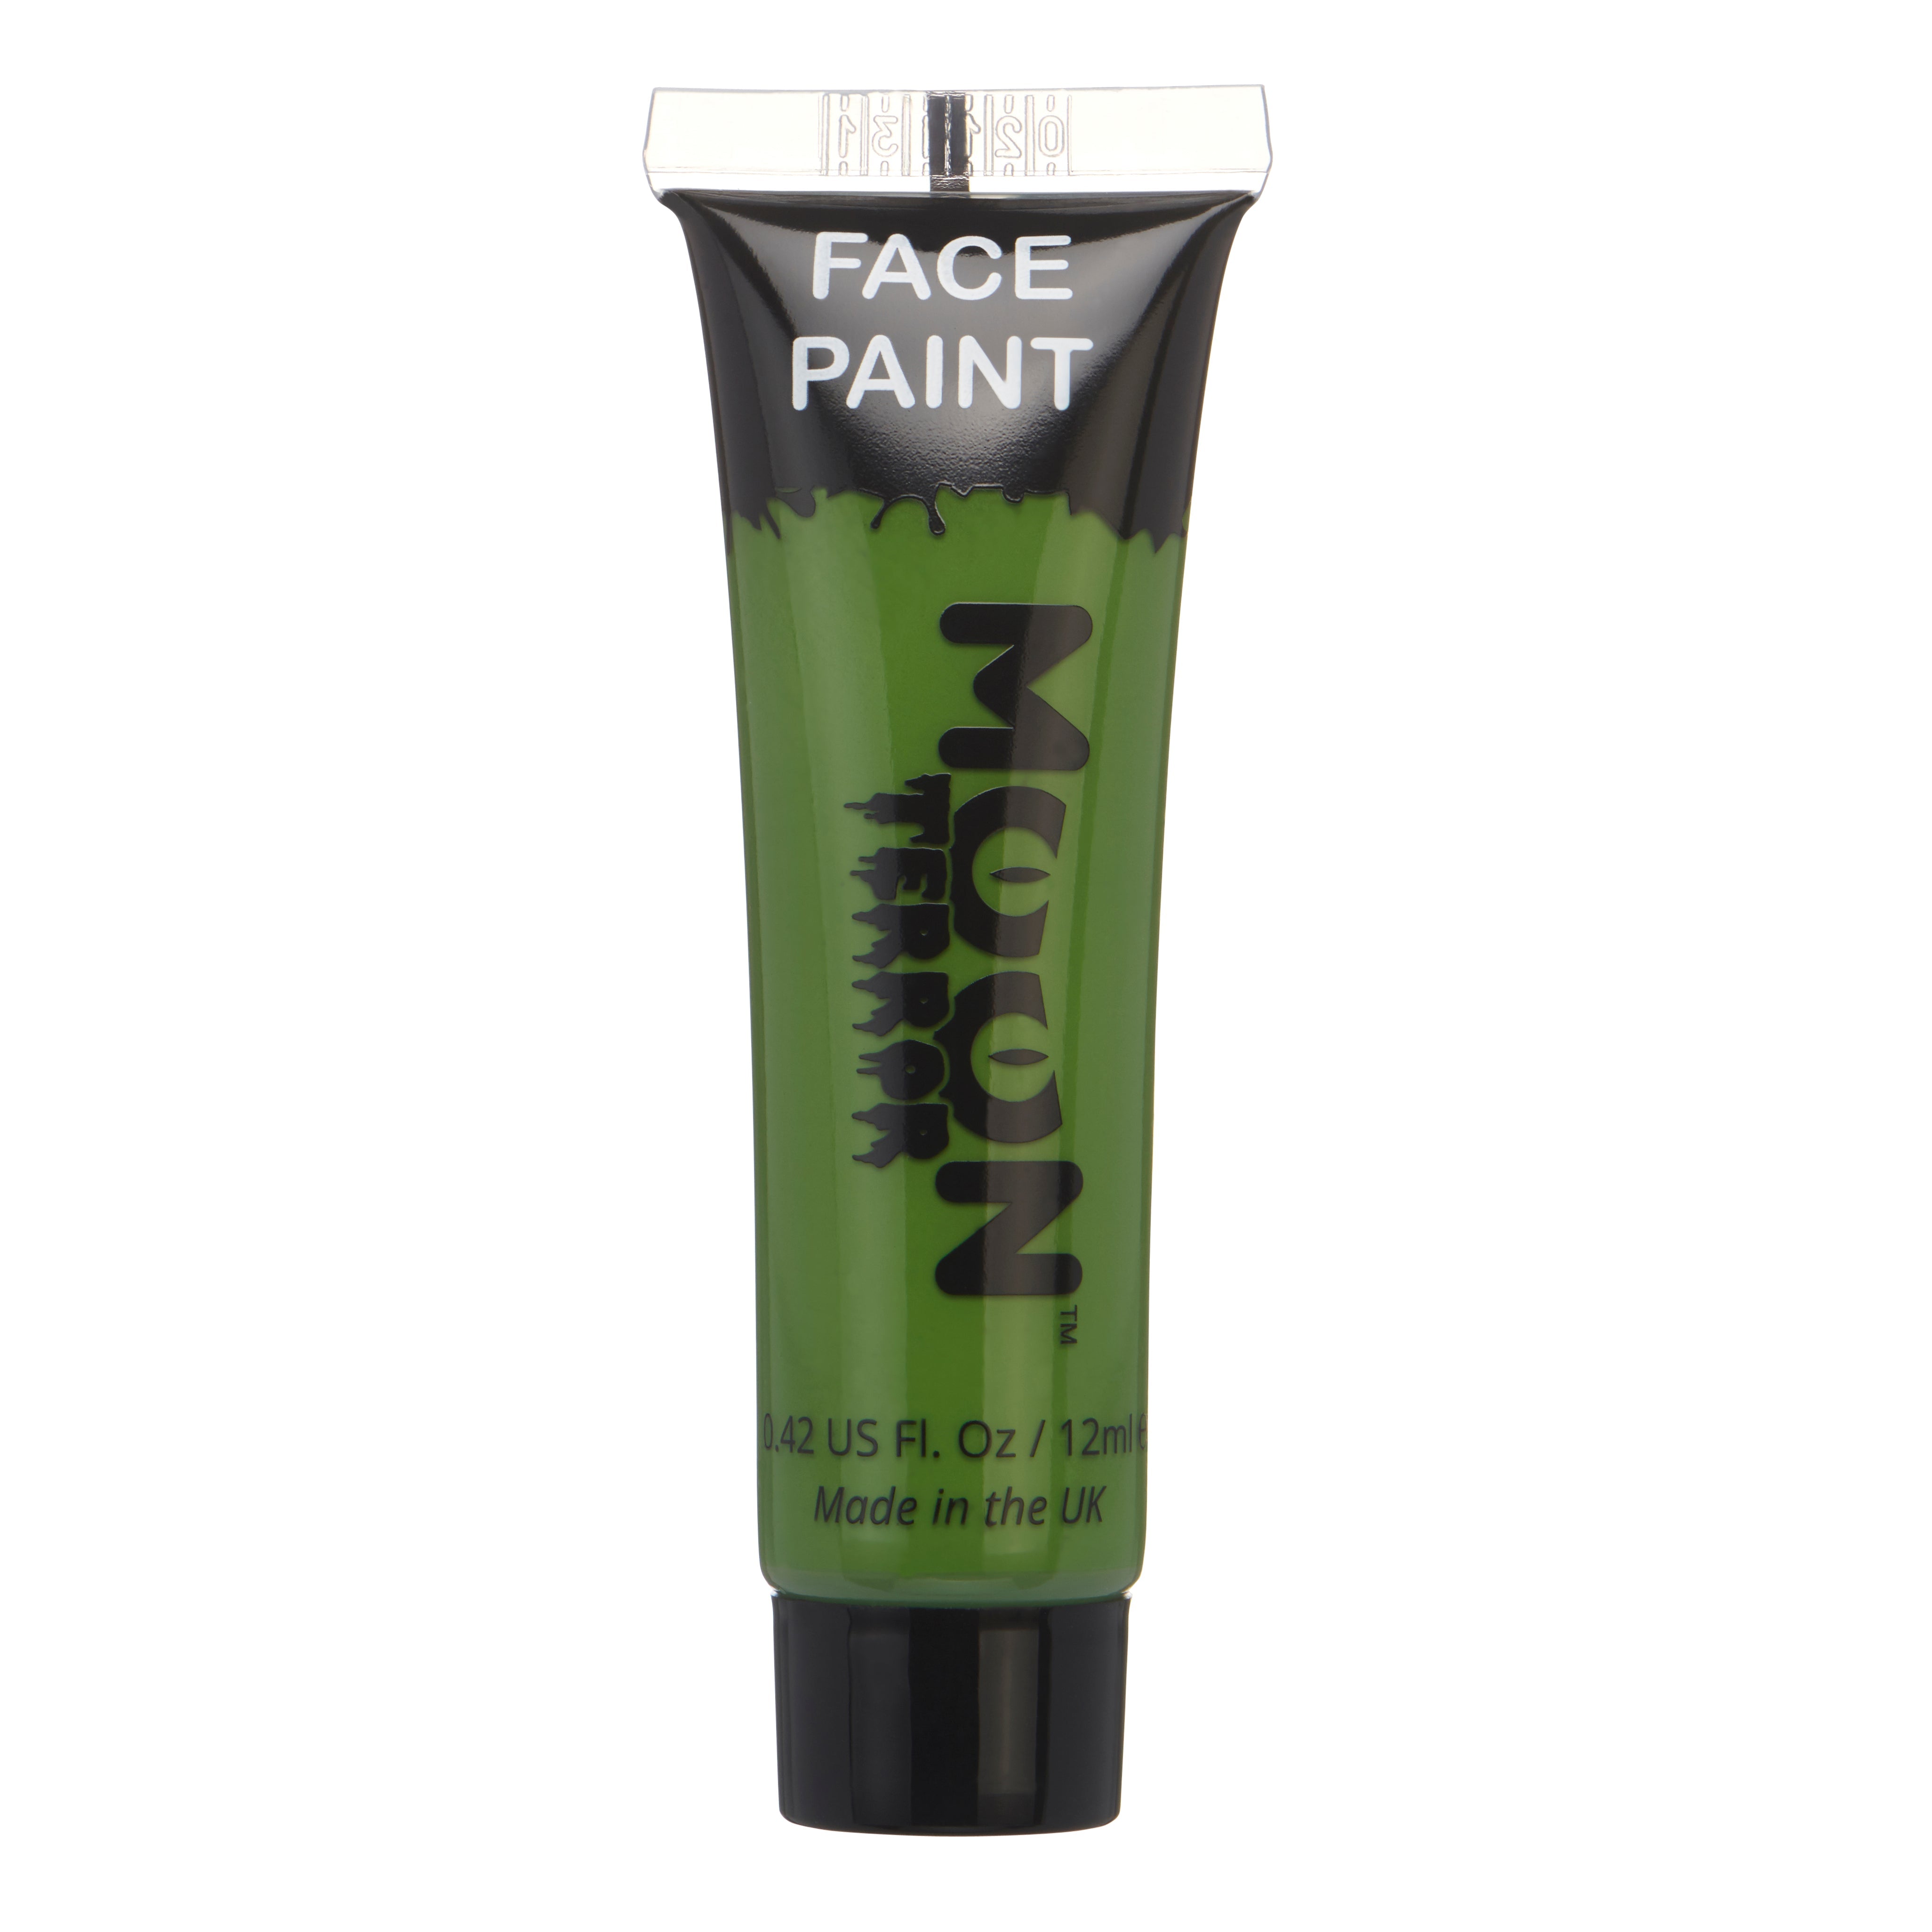 Zombie Green - Terror Face & Body Paint Makeup, 12mL. Cosmetically certified, FDA & Health Canada compliant, cruelty free and vegan.